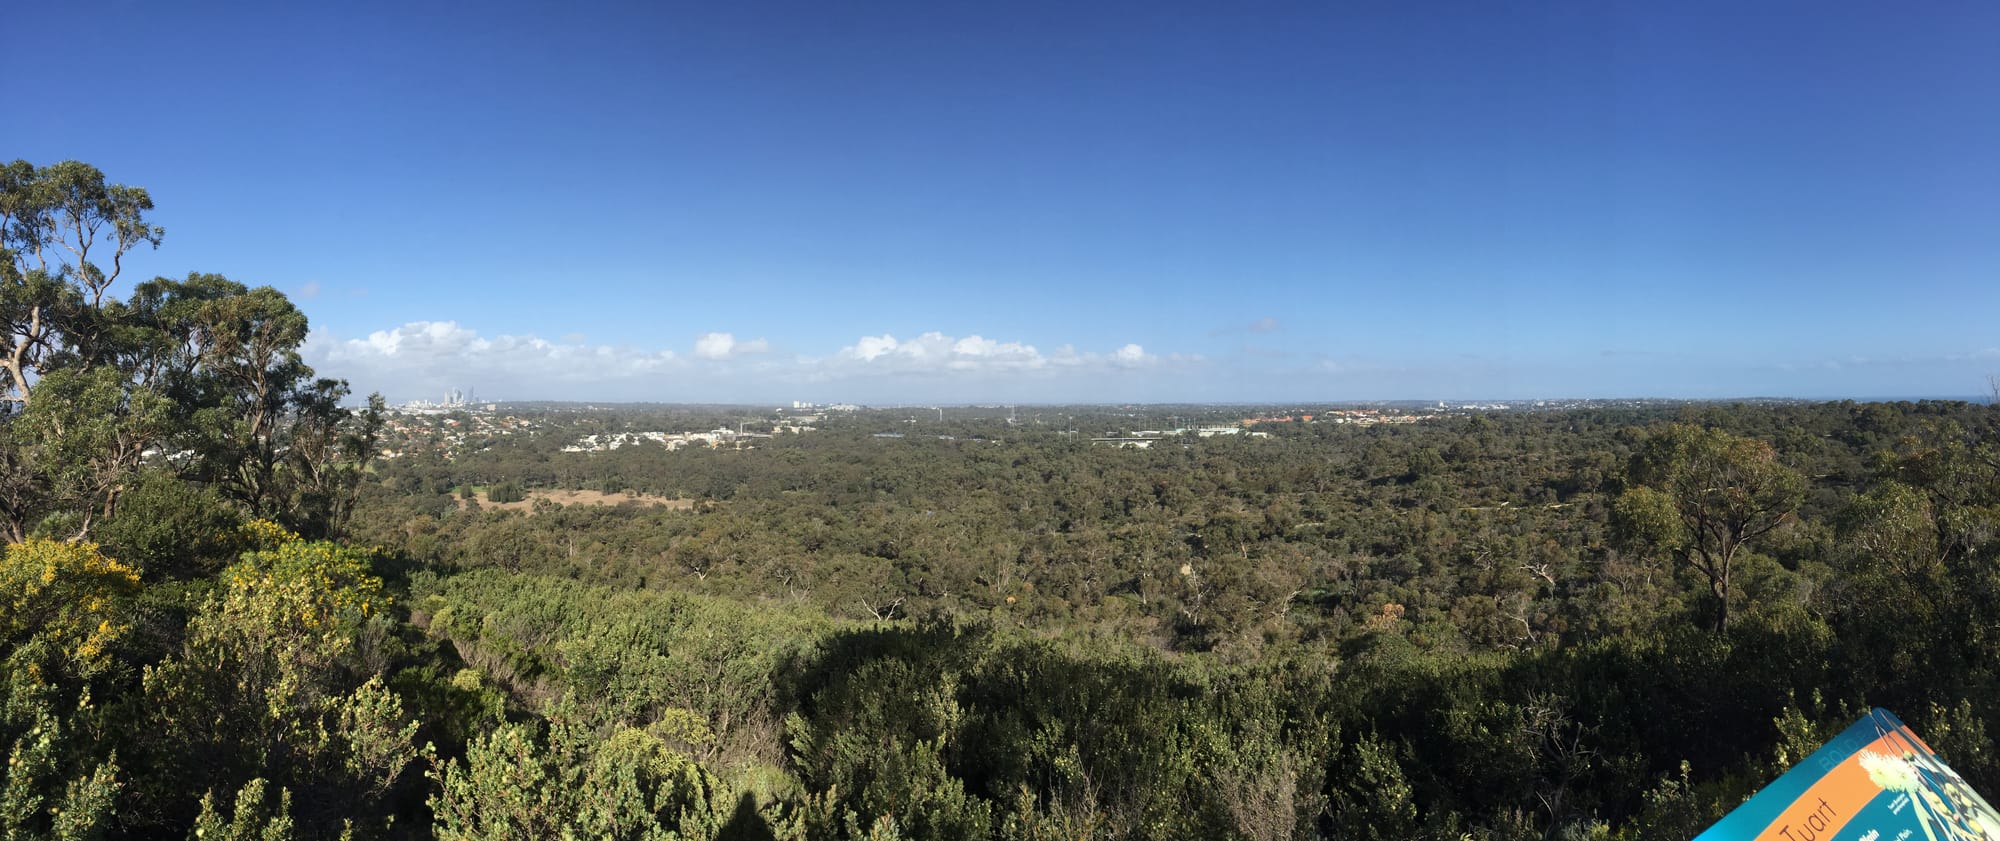 Photo by Author — views from Bold Park Reserve, Perth, Australia